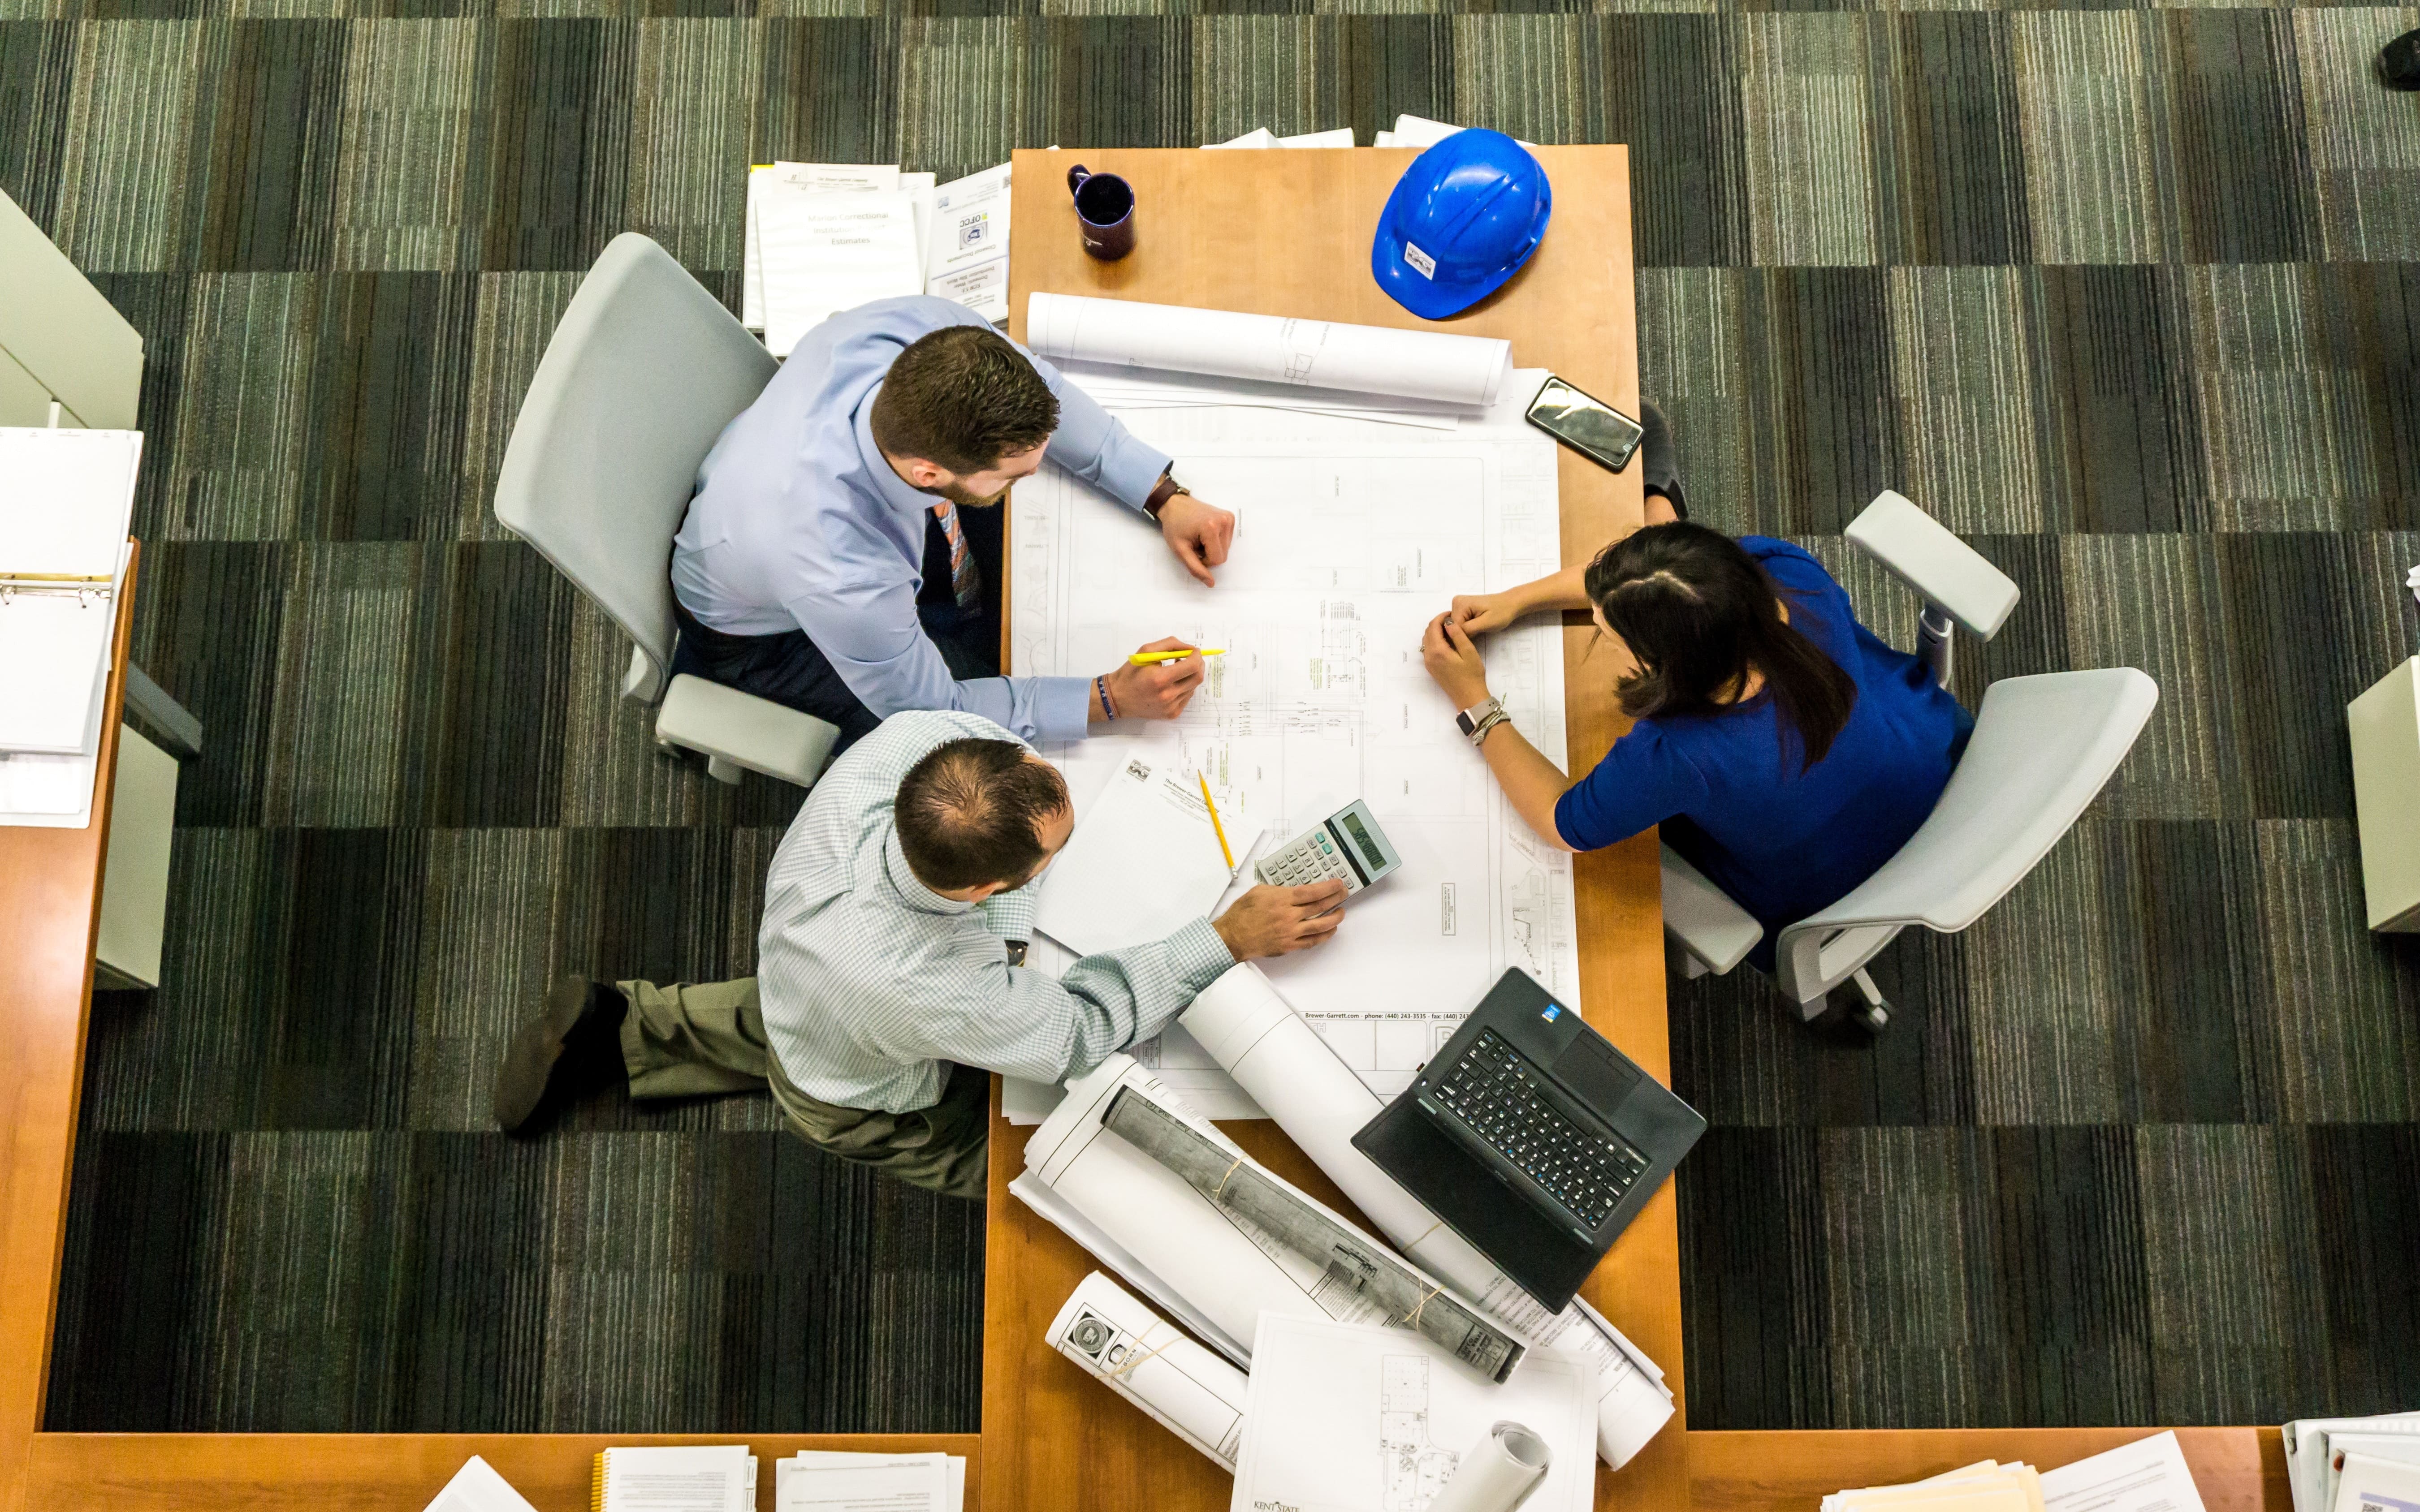 Three people sit at a table with blue prints. A blue hard hat can be seen. 